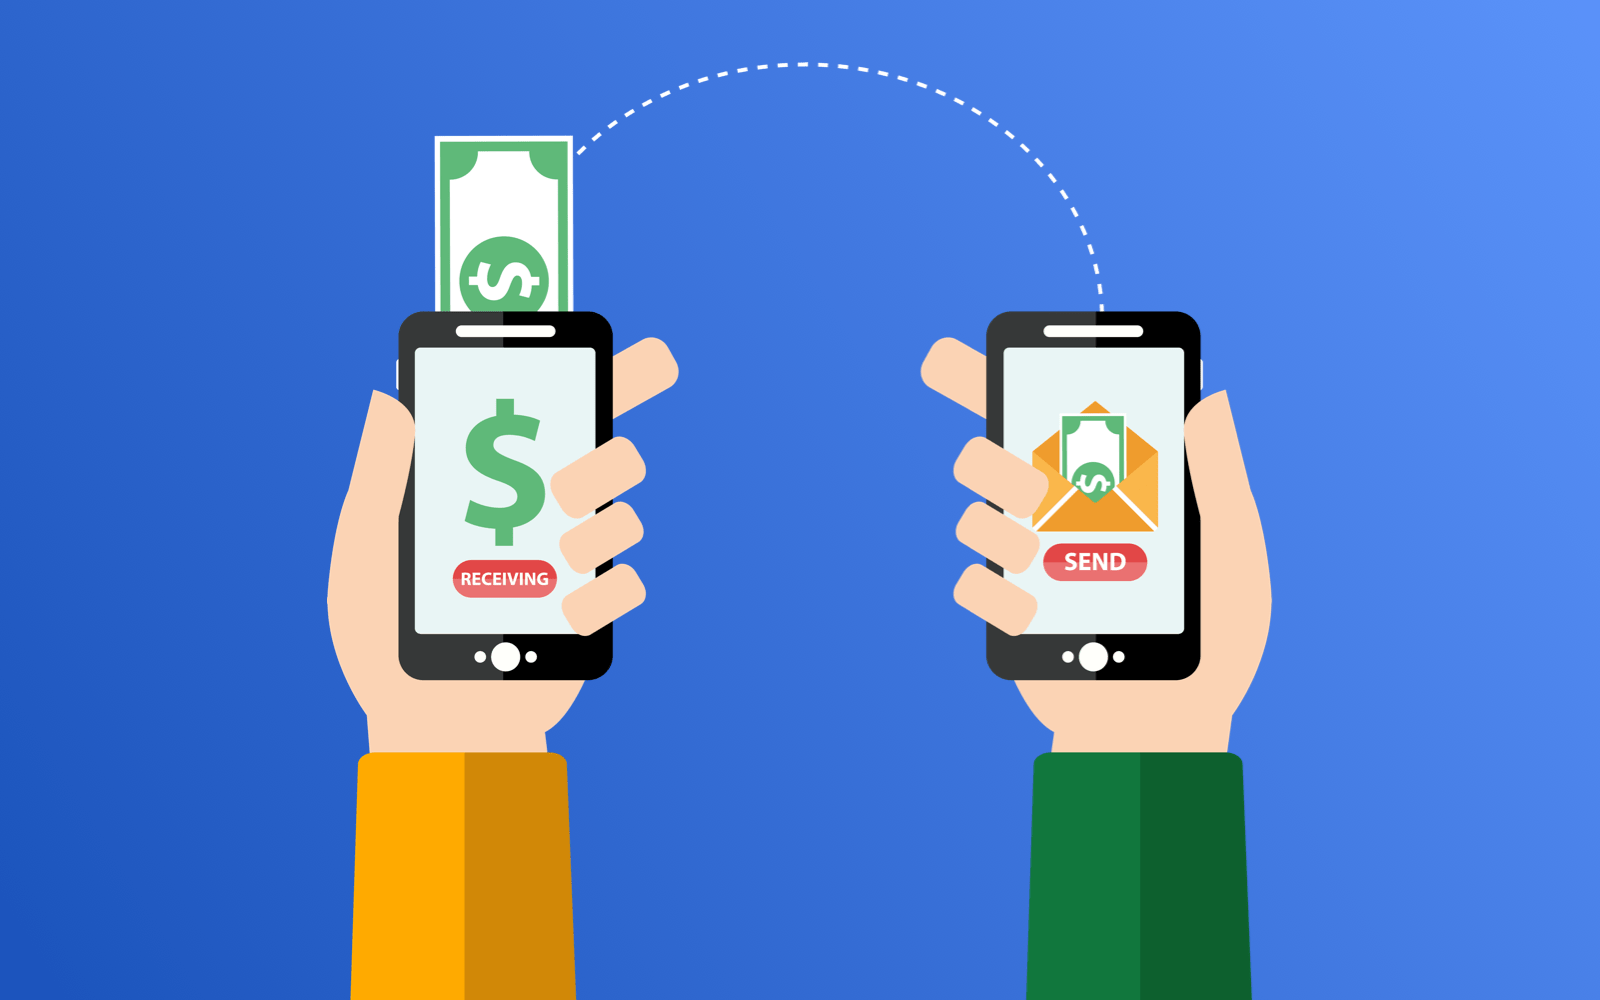 Build A P2P Payment App That Meets All Your Requirements